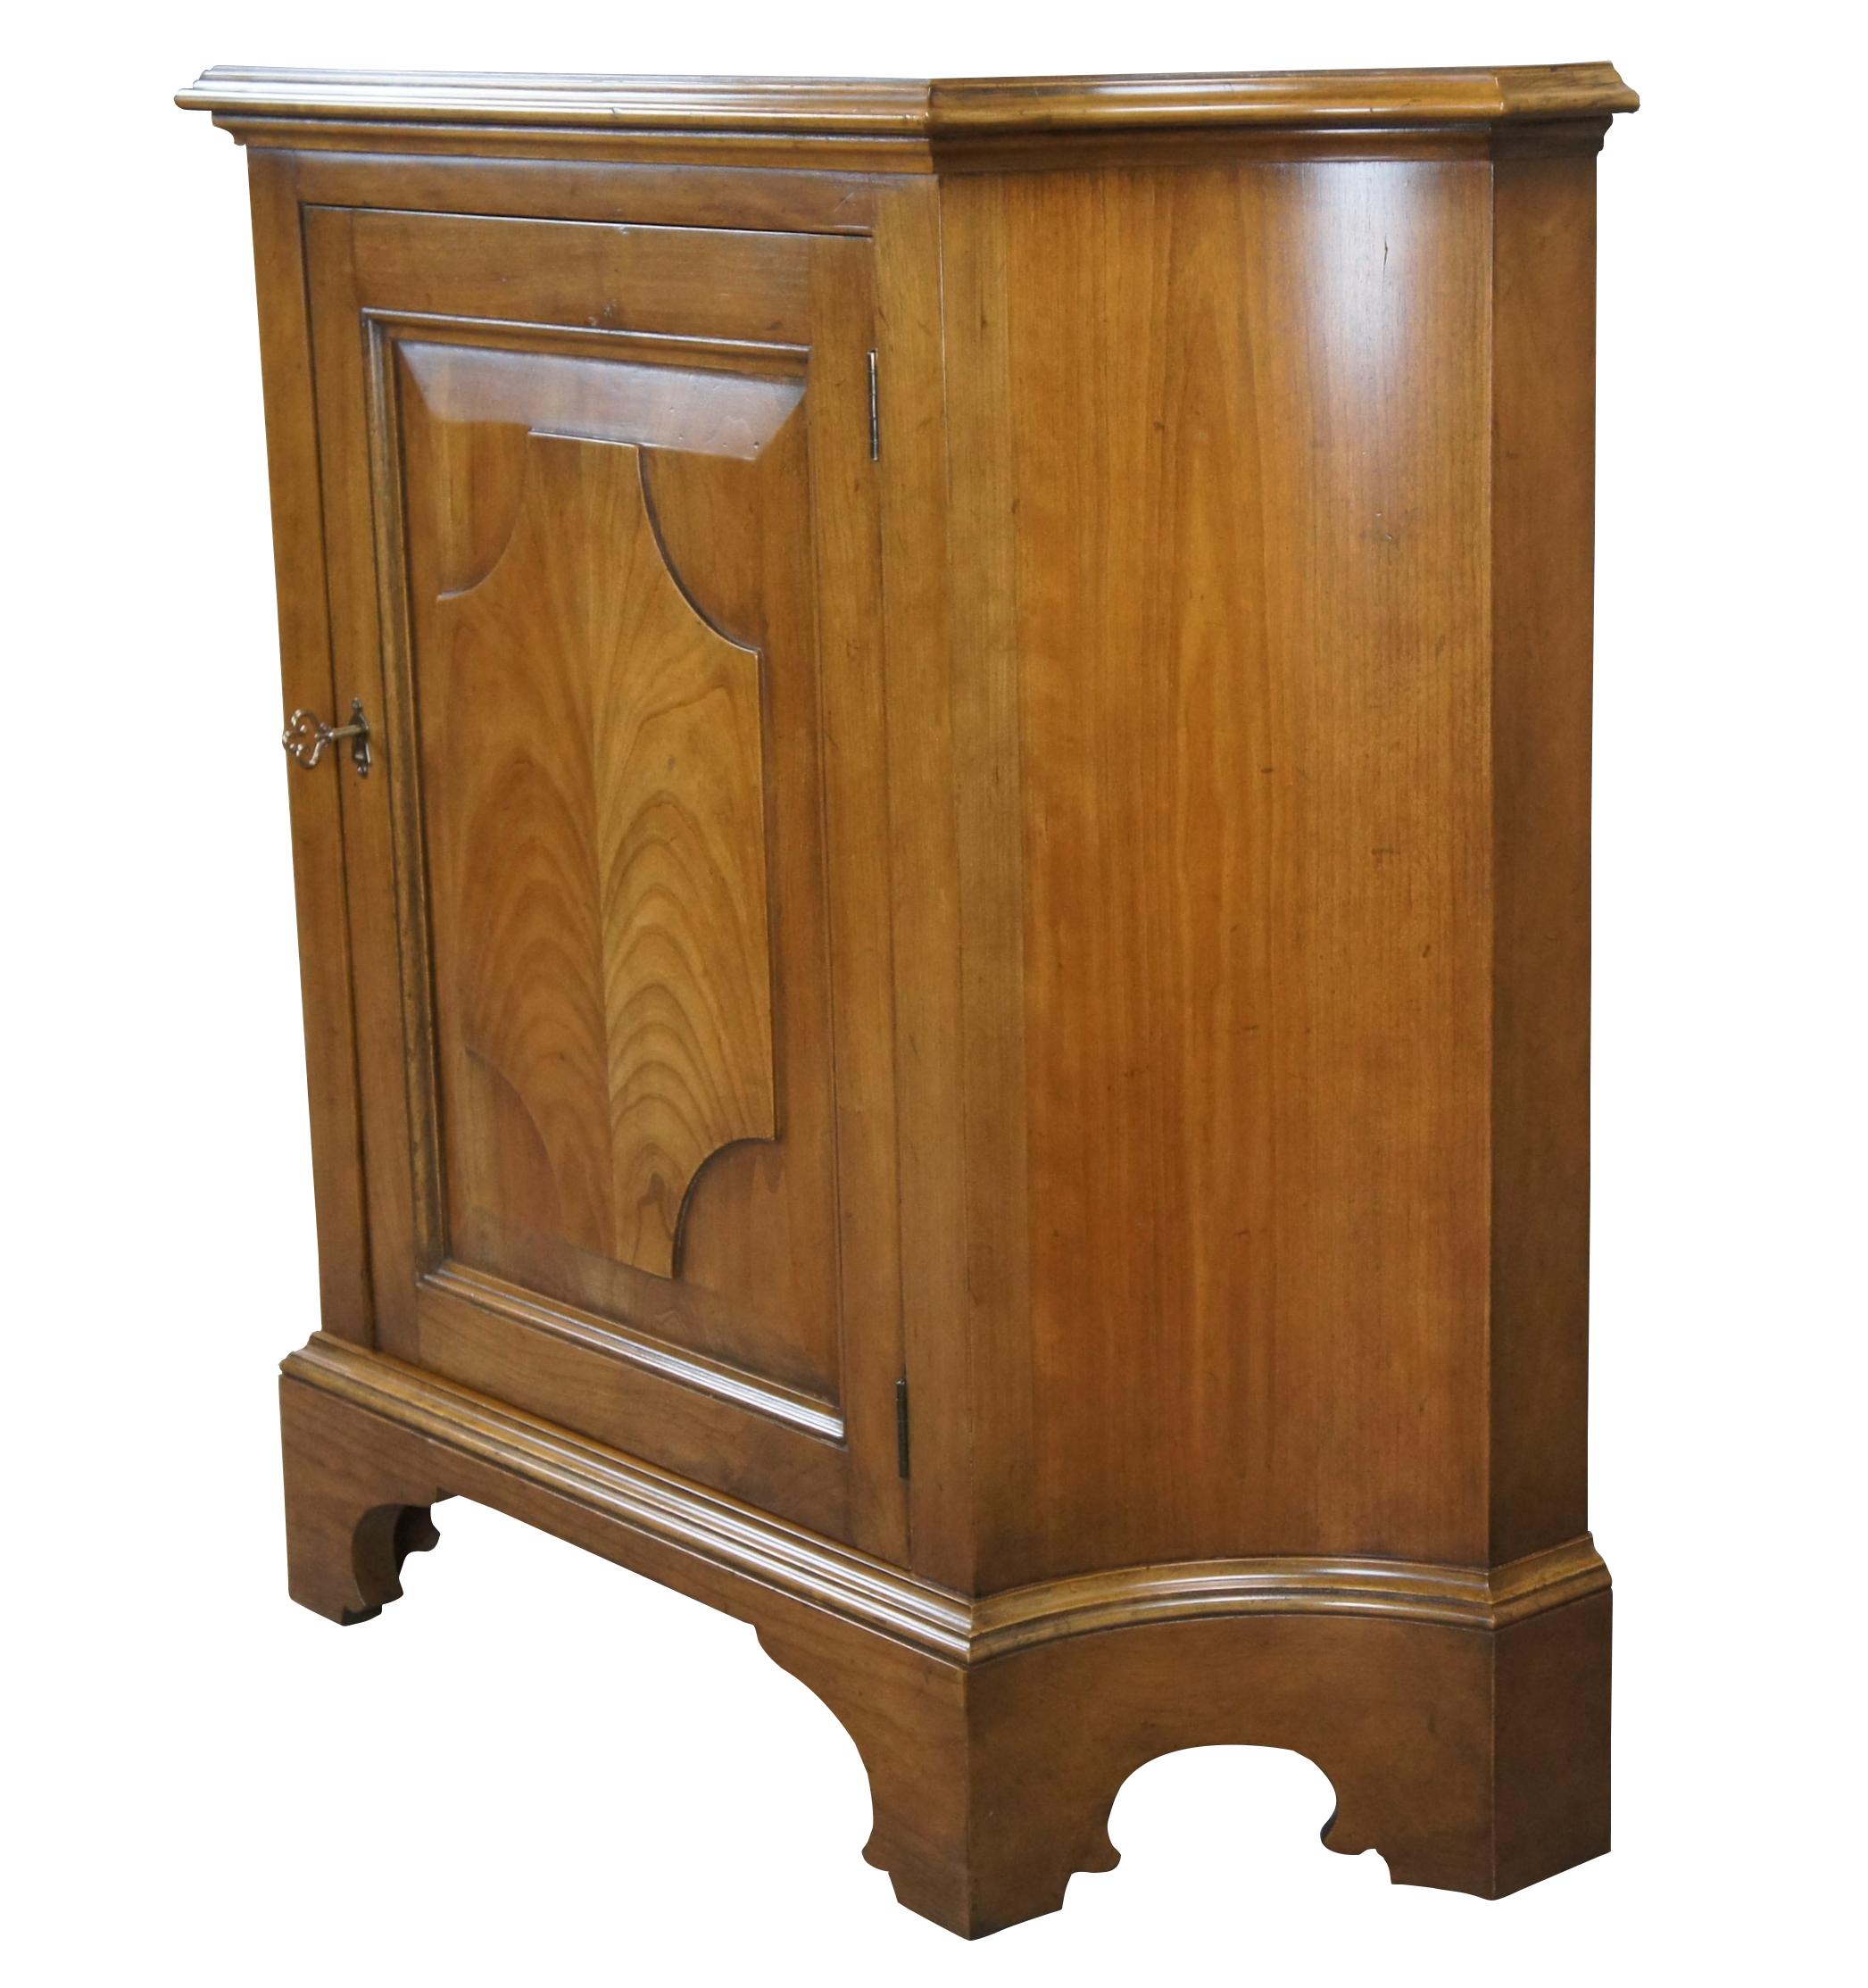 A stunning console cabinet or commode by Baker Furniture, circa 1960s. Made from Merisier (French Cherry) with a central door featuring a raised panel and elegant matchbook veneer in the design of a feather pull. The cabinet opens via skeleton key